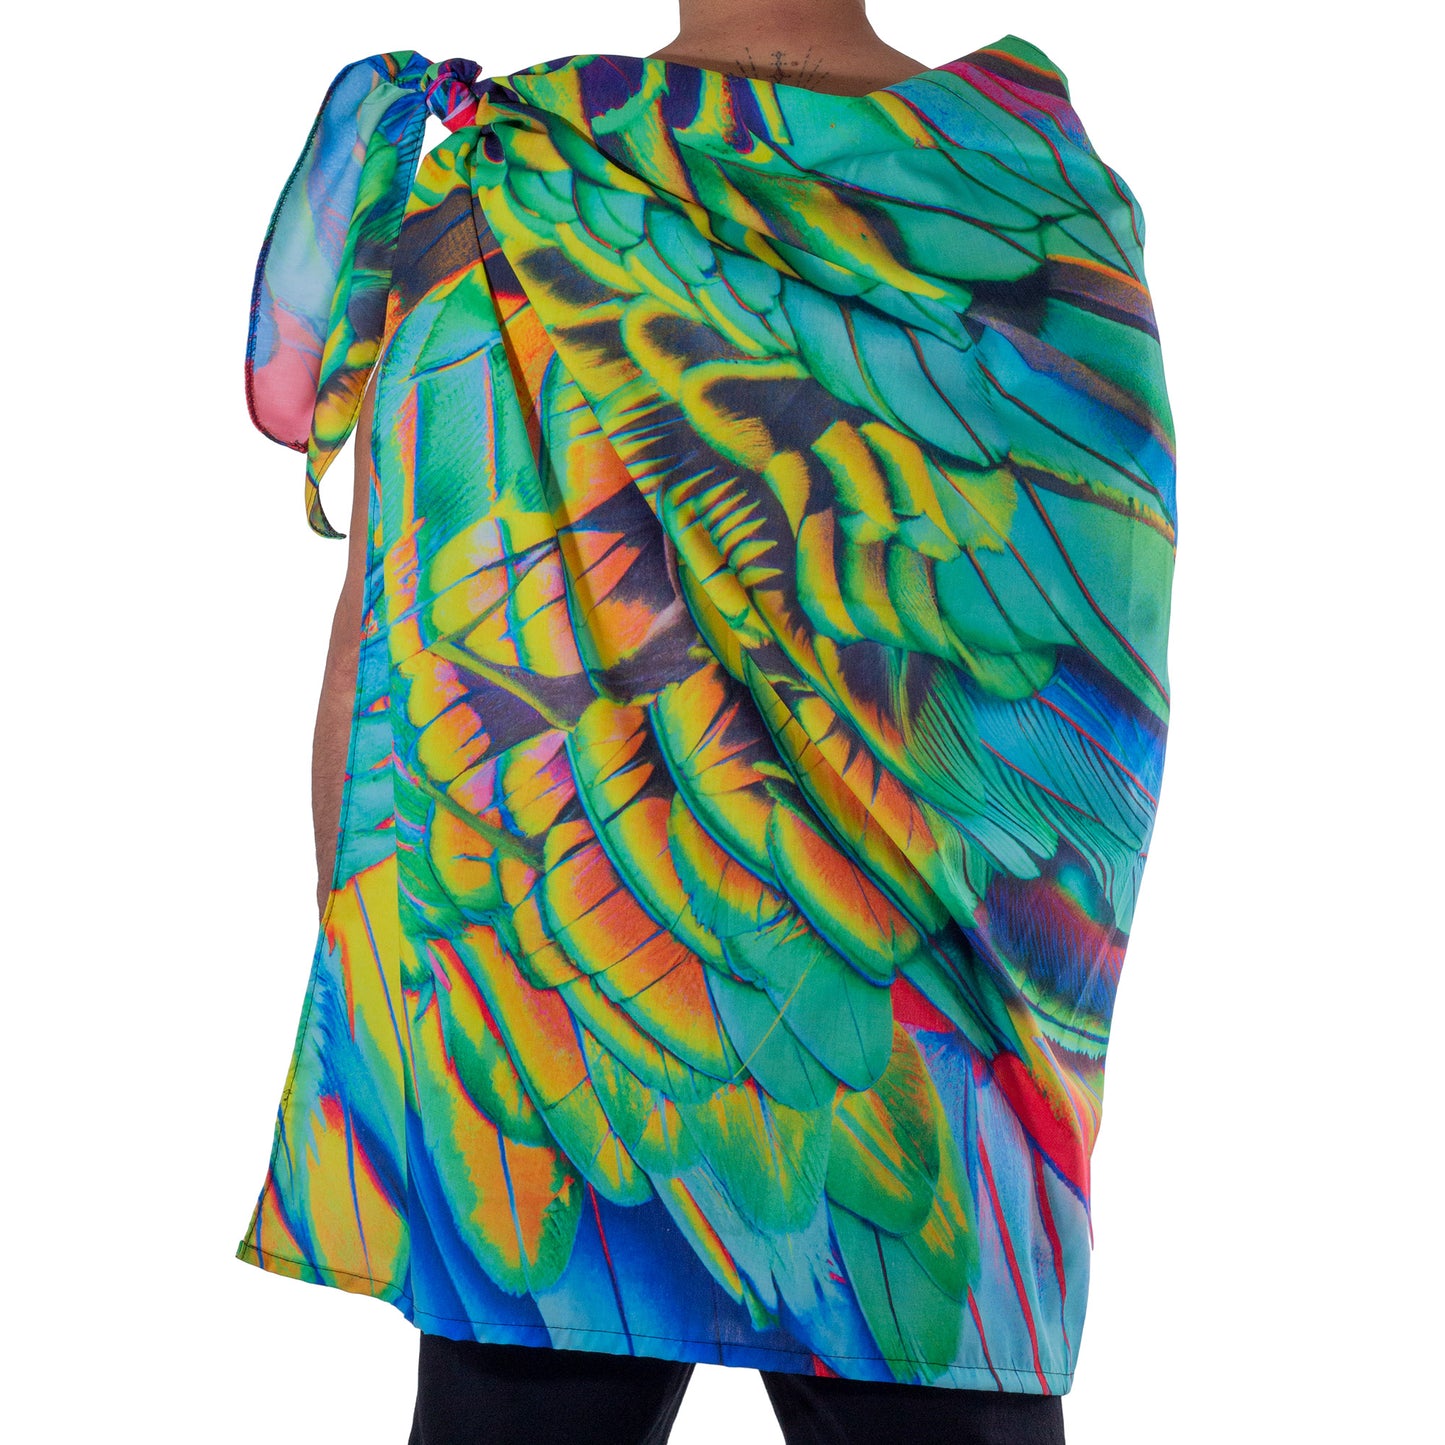 TM0002 Tematl Quetzal Patterned Poncho with Feathers skinit